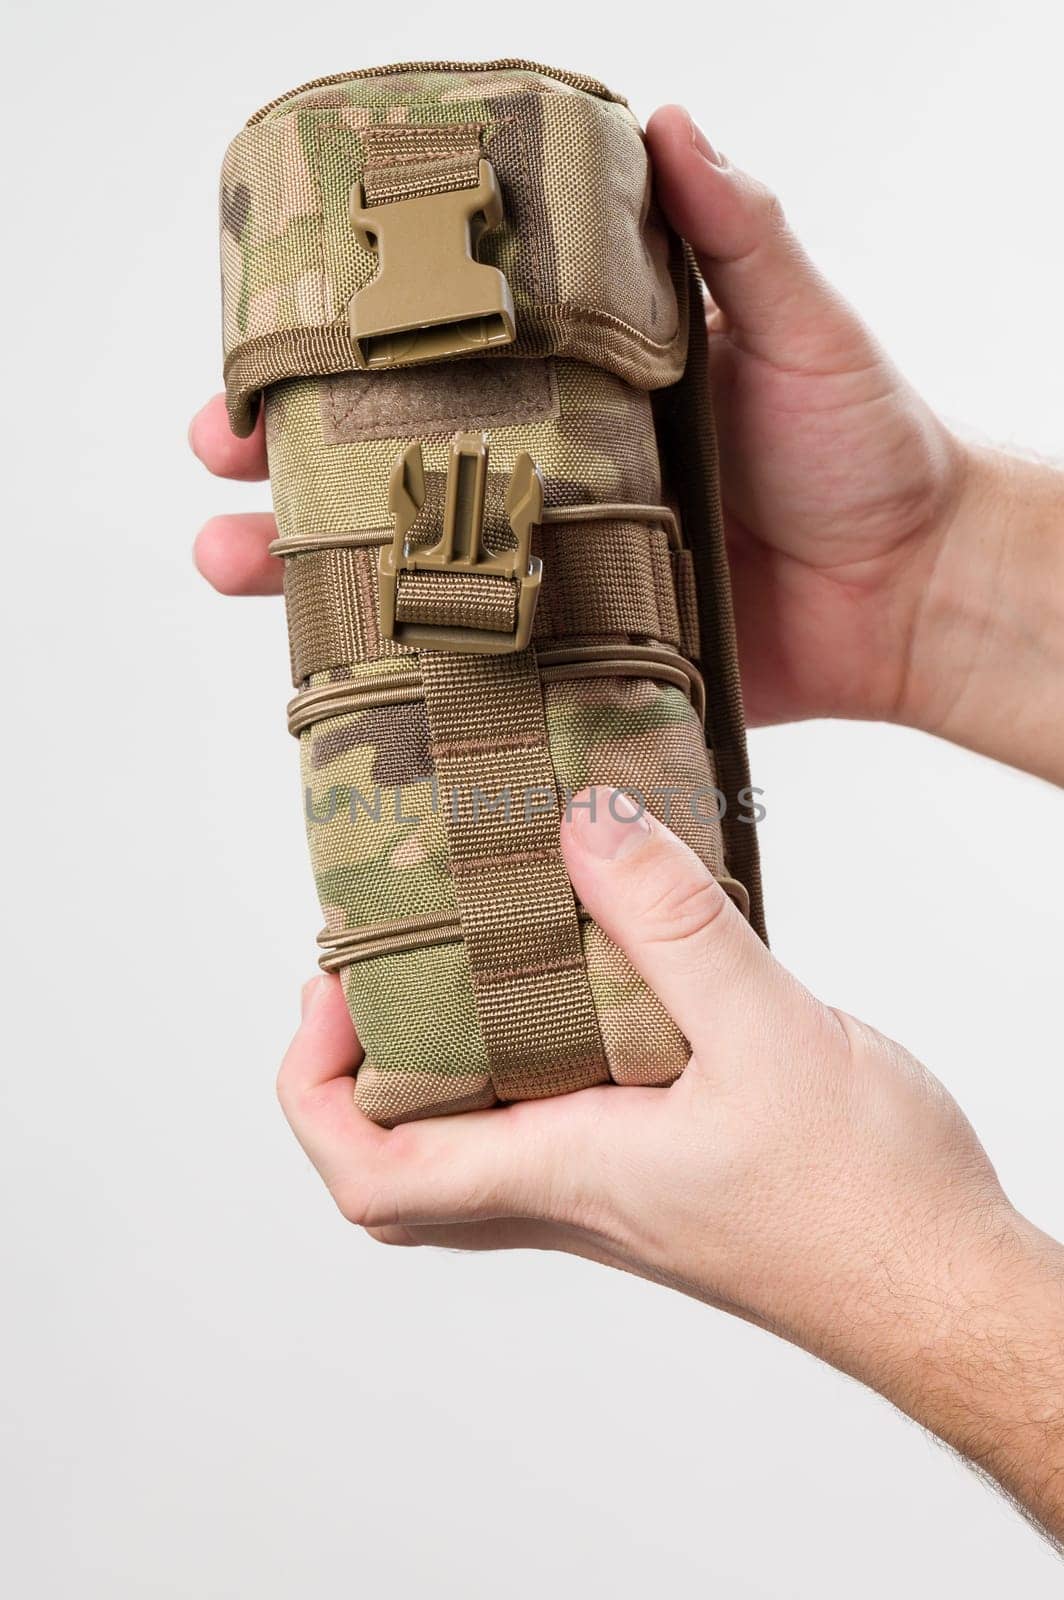 A man holds a protective cover for a monocular, pixelated fabric for the military. by Niko_Cingaryuk